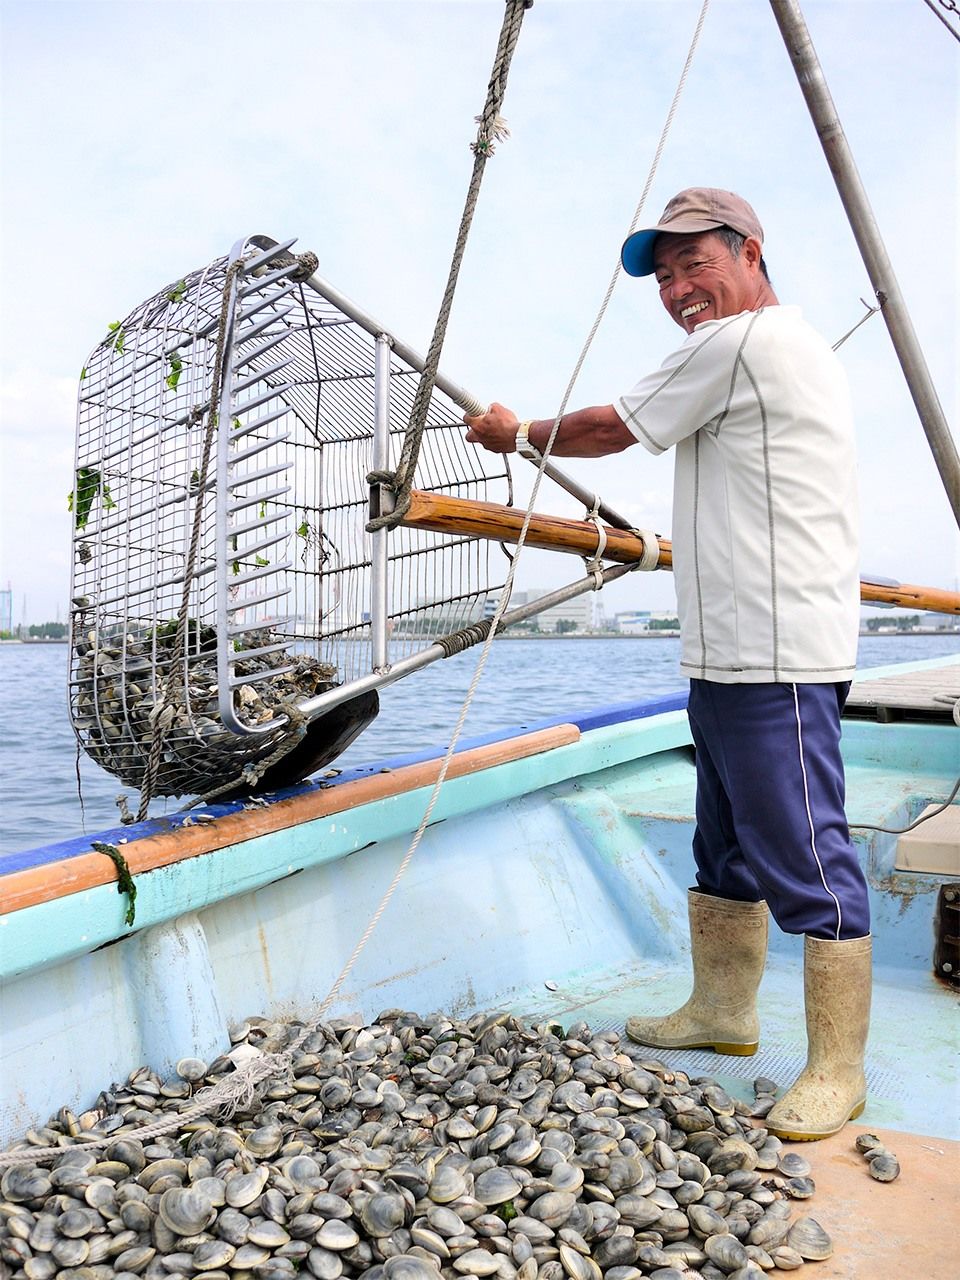 Fisherman Sawada Yōichi uses his boat and a professional-grade clam rake to dig for quahogs off of Funabashi in Chiba Prefecture.